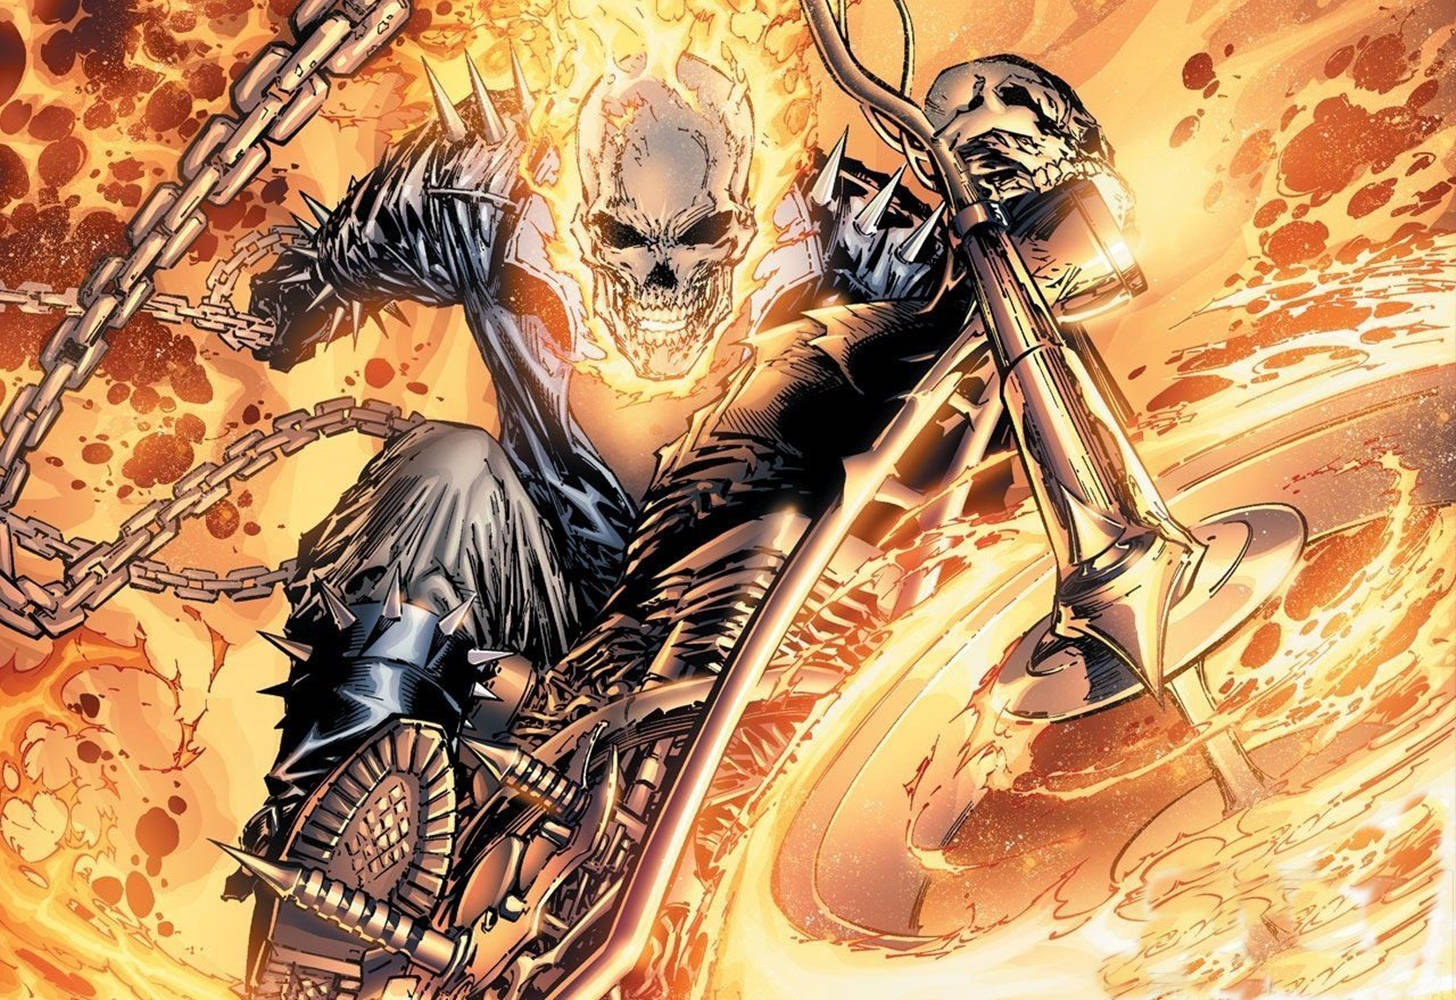 Cool 3d Ghost Rider On Fire Wallpaper